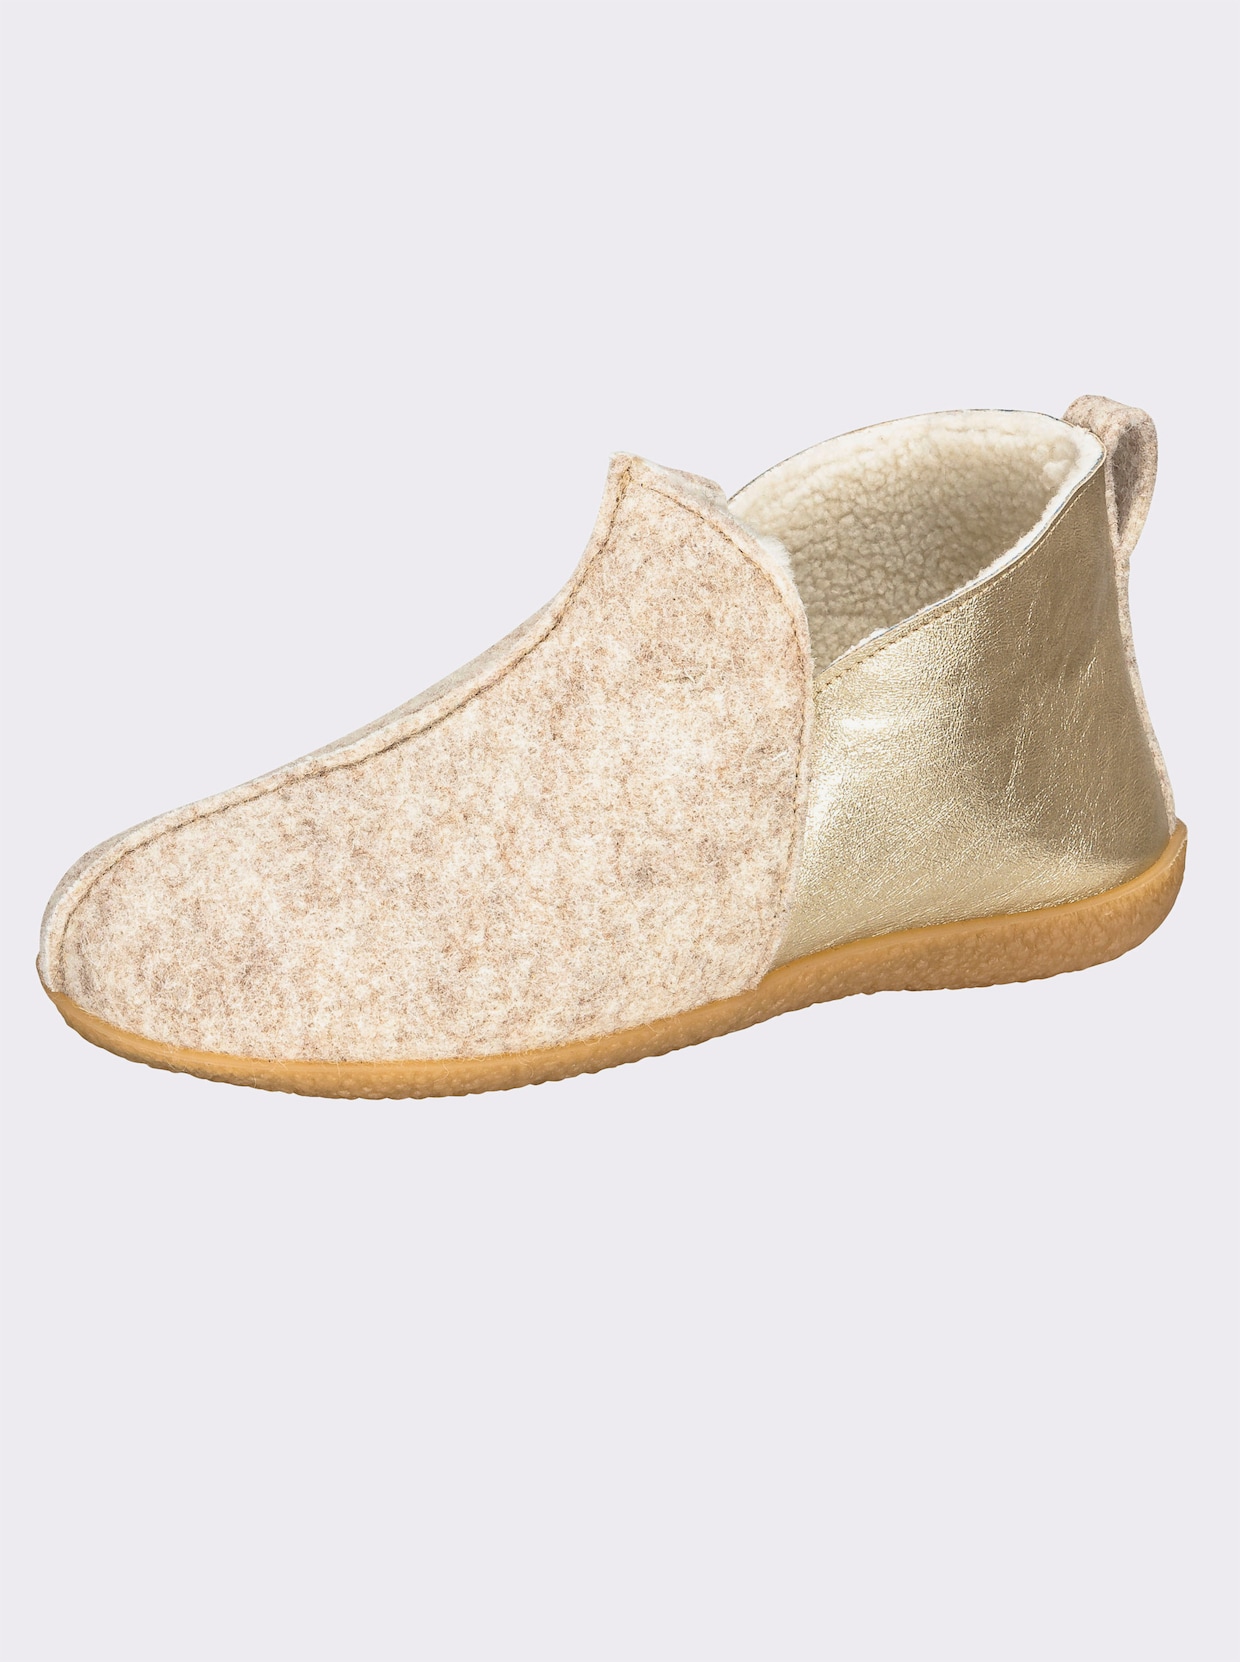 Dr. Feet Chaussons - beige-couleur or